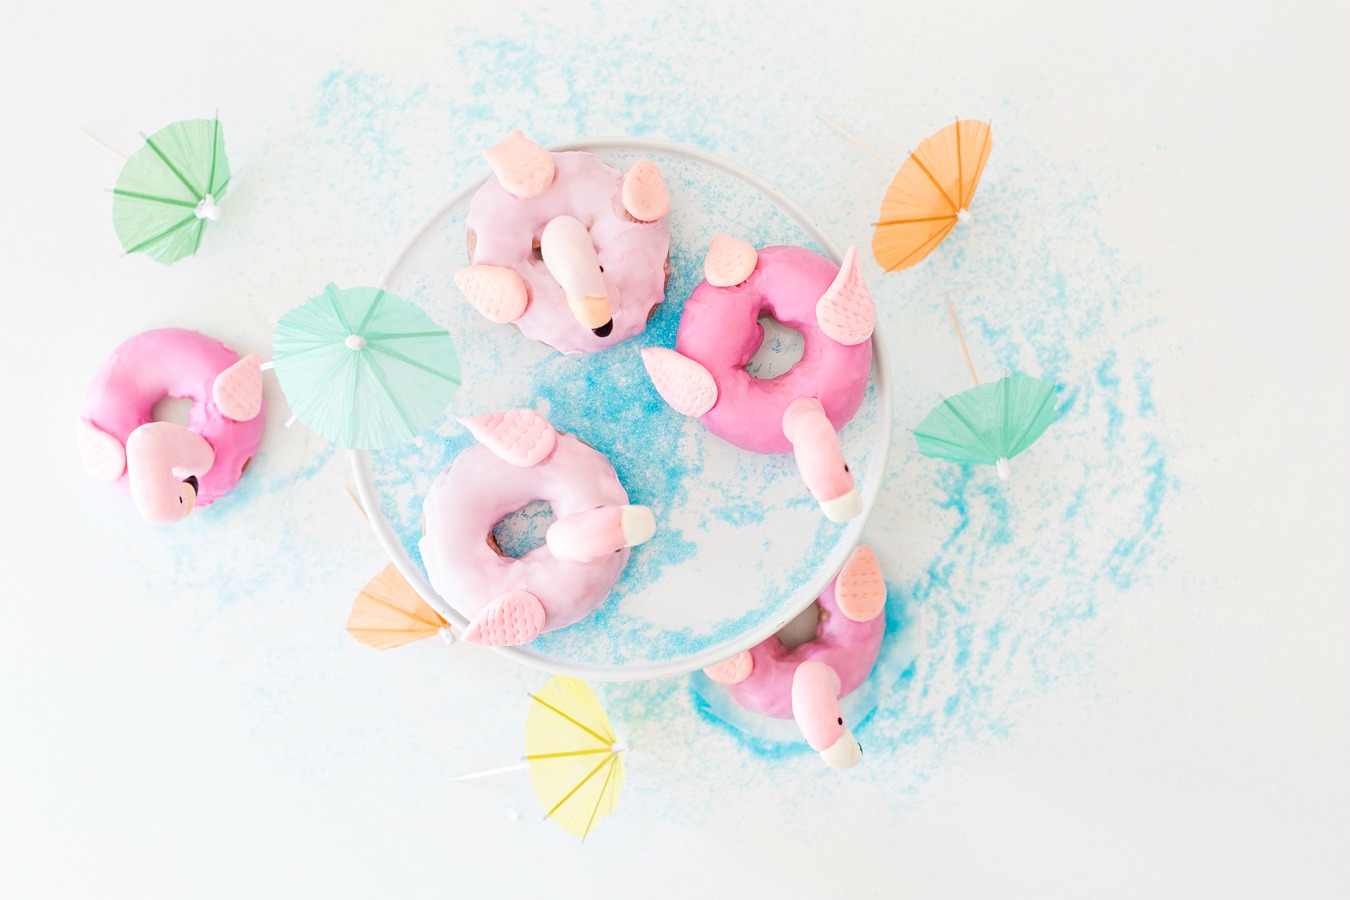 What Donut Am I? Pool float donuts